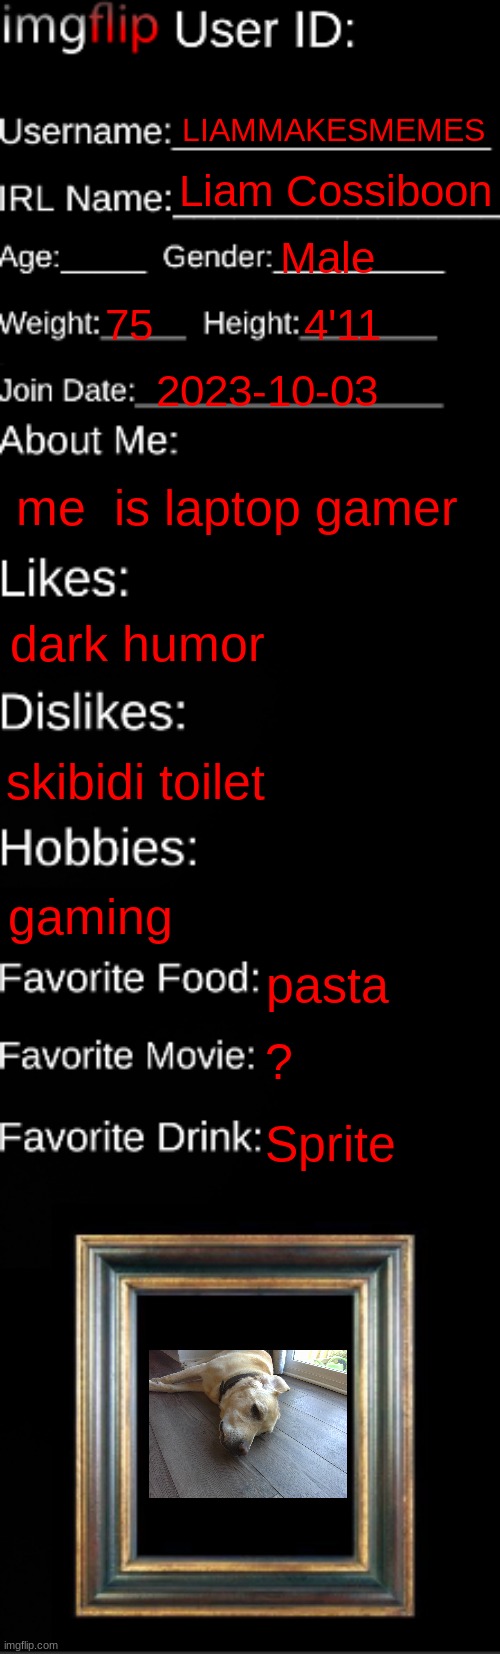 LOL | LIAMMAKESMEMES; Liam Cossiboon; Male; 75; 4'11; 2023-10-03; me  is laptop gamer; dark humor; skibidi toilet; gaming; pasta; ? Sprite | image tagged in imgflip id card | made w/ Imgflip meme maker